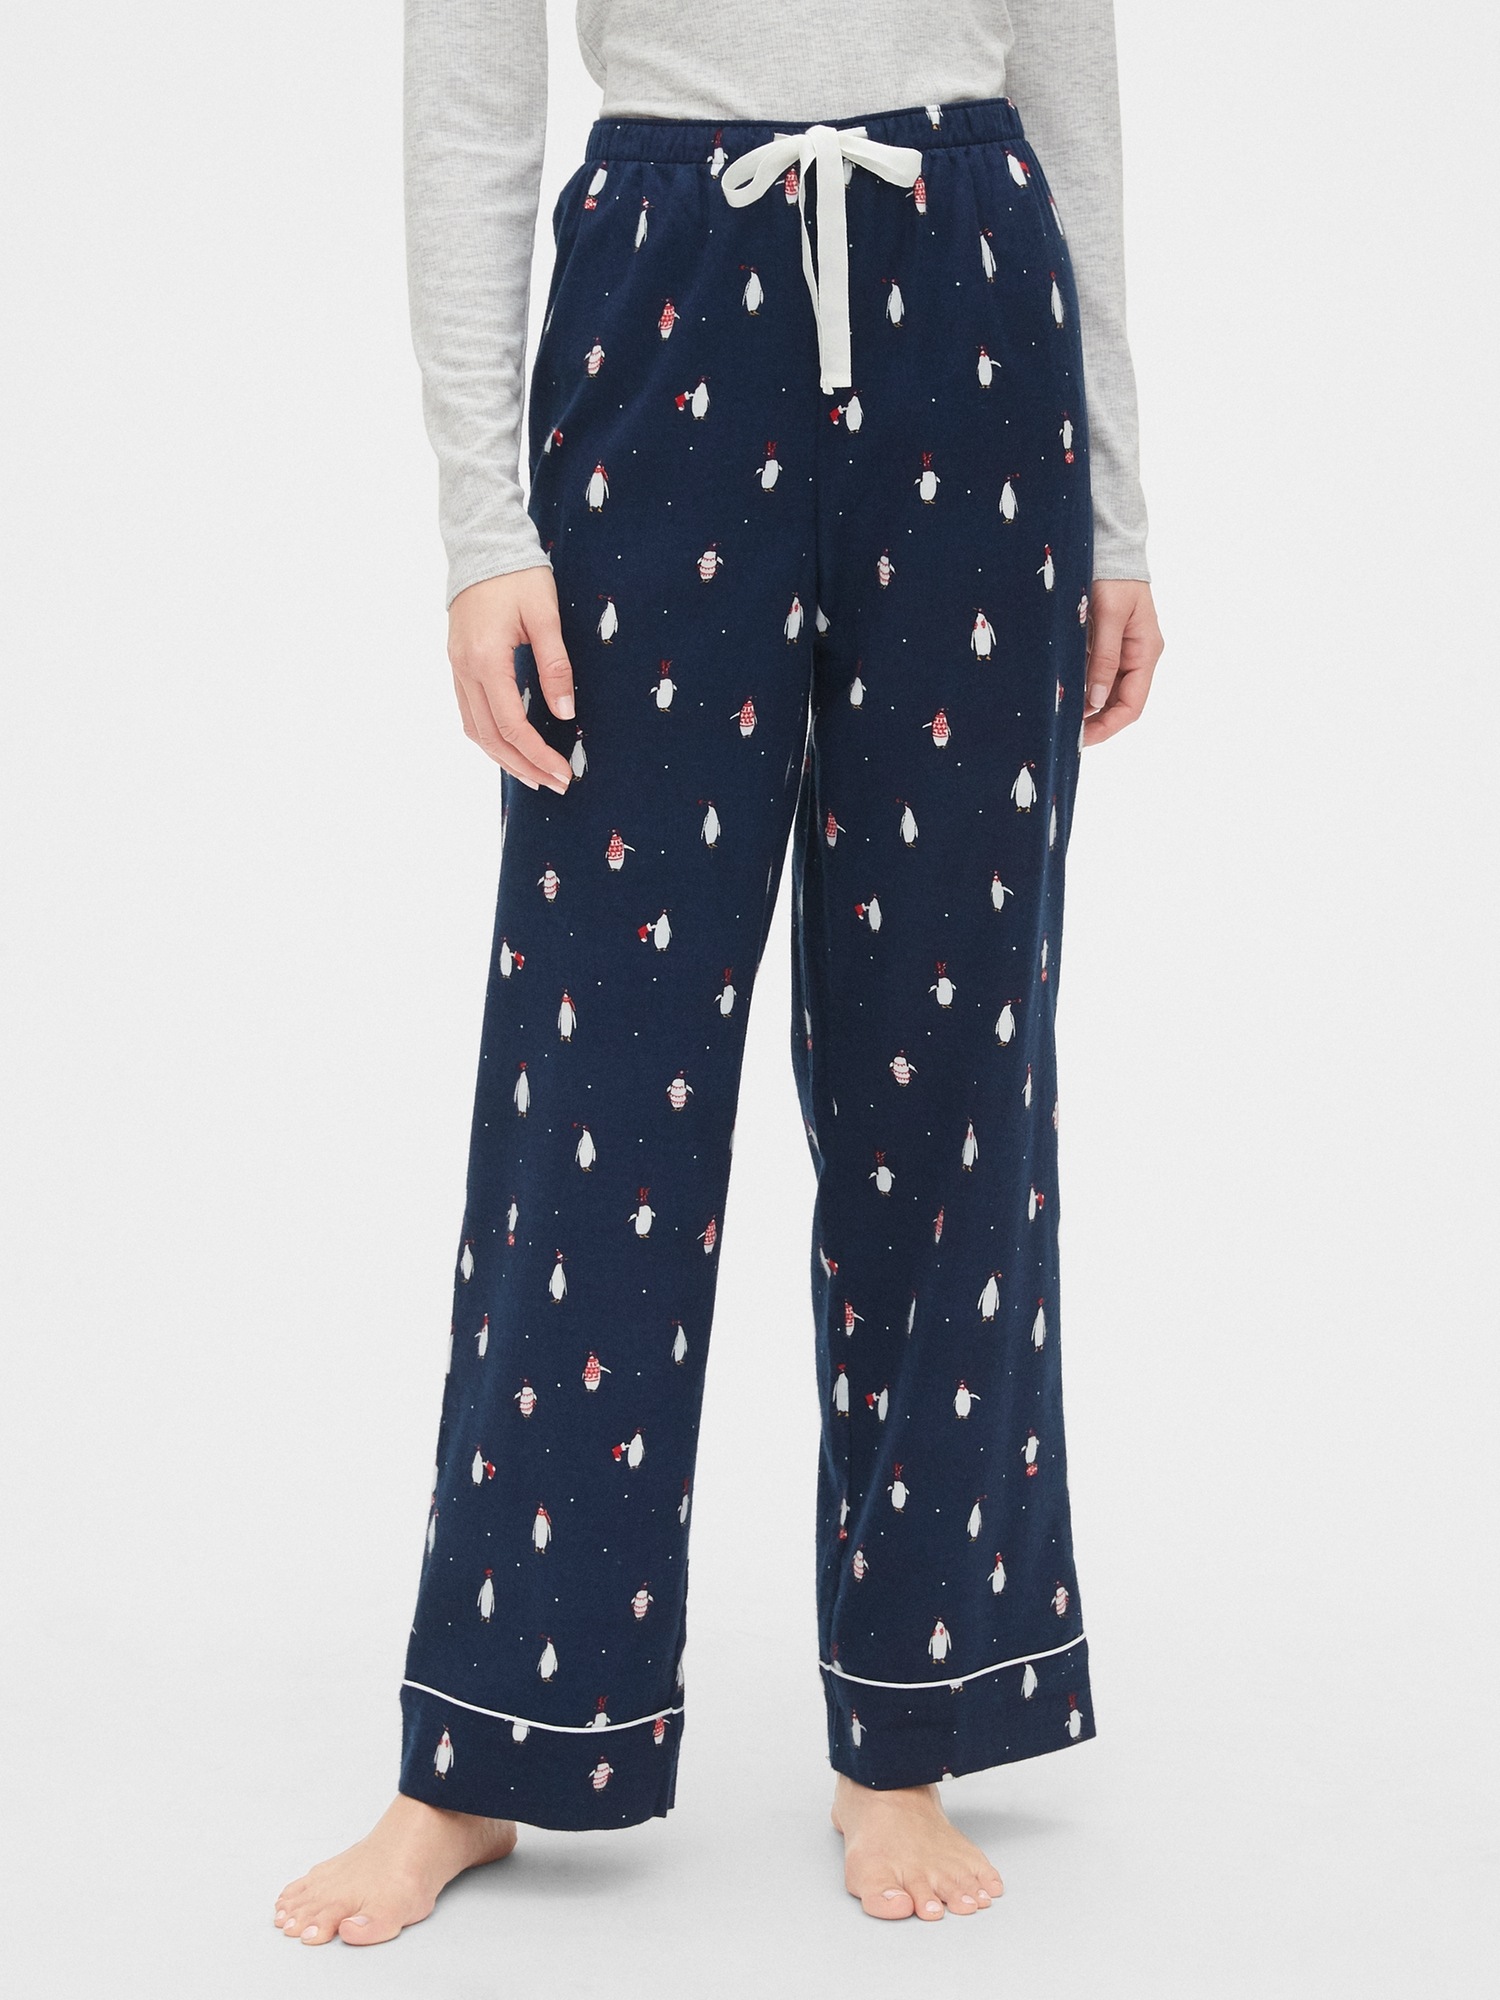 Womens Winter Flannel Pajama Pajama Pants Women With Soft Bottoms For  Thermal Lounge Wear And Casual Home Comfort From Hongpingguog, $11.54